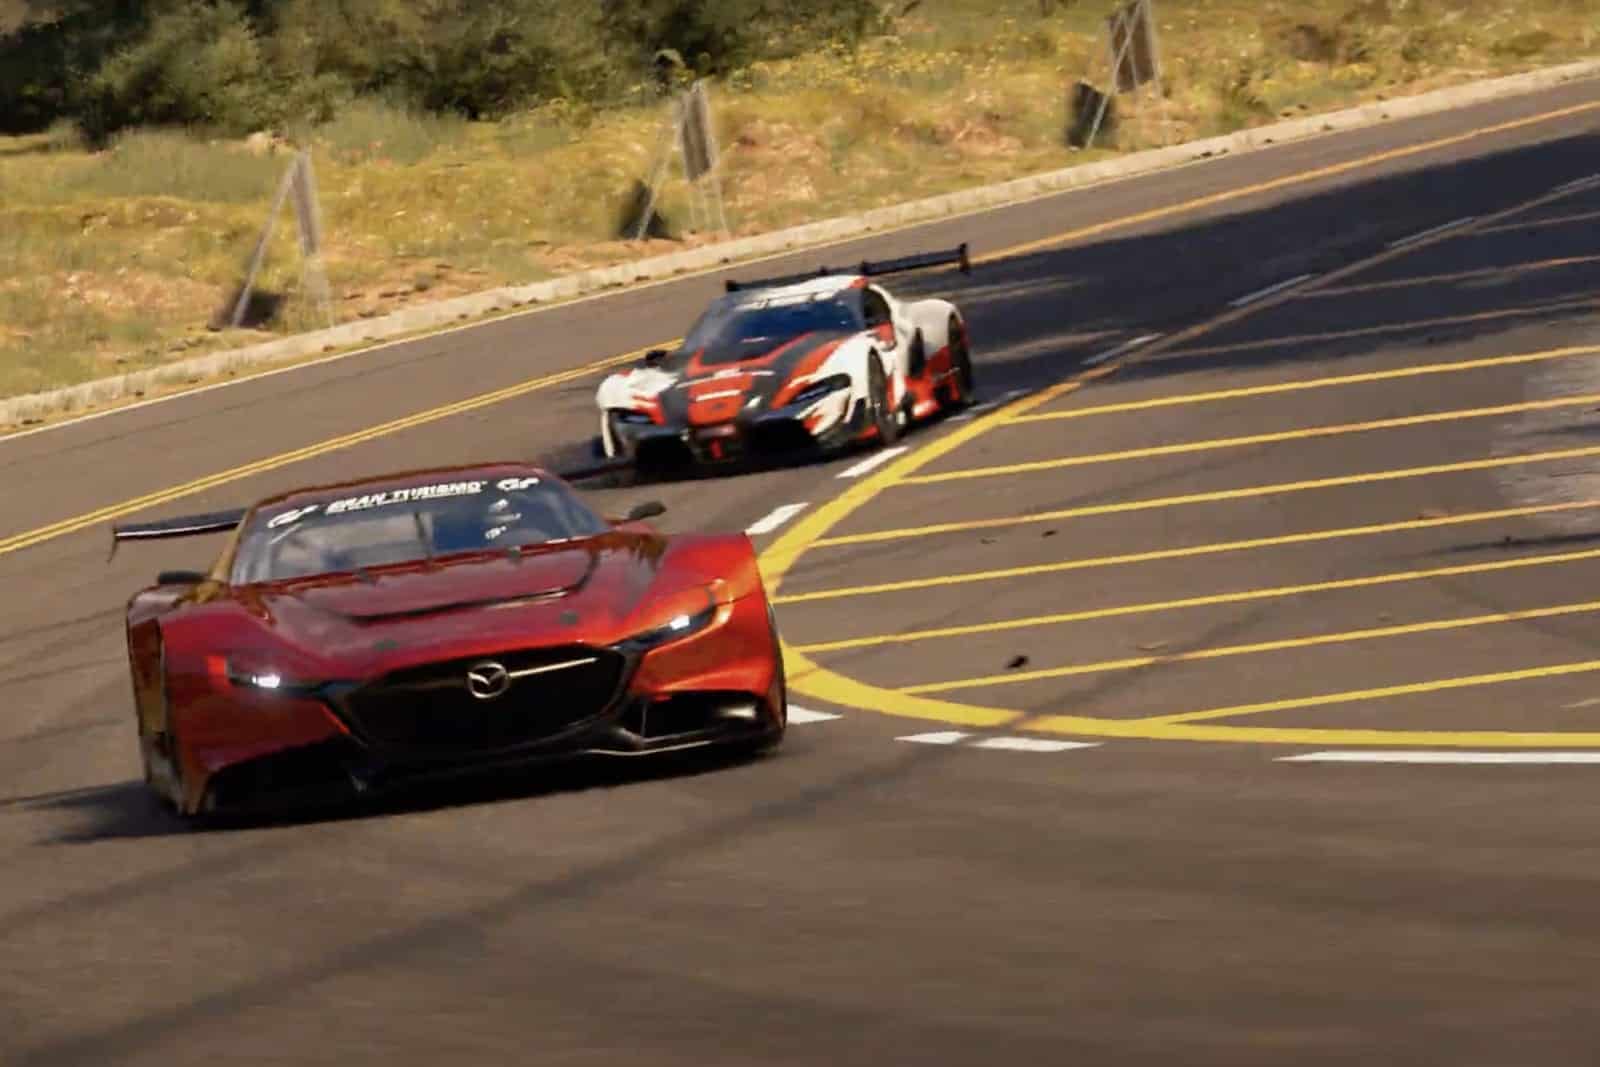 Gran Turismo 7 preview footage